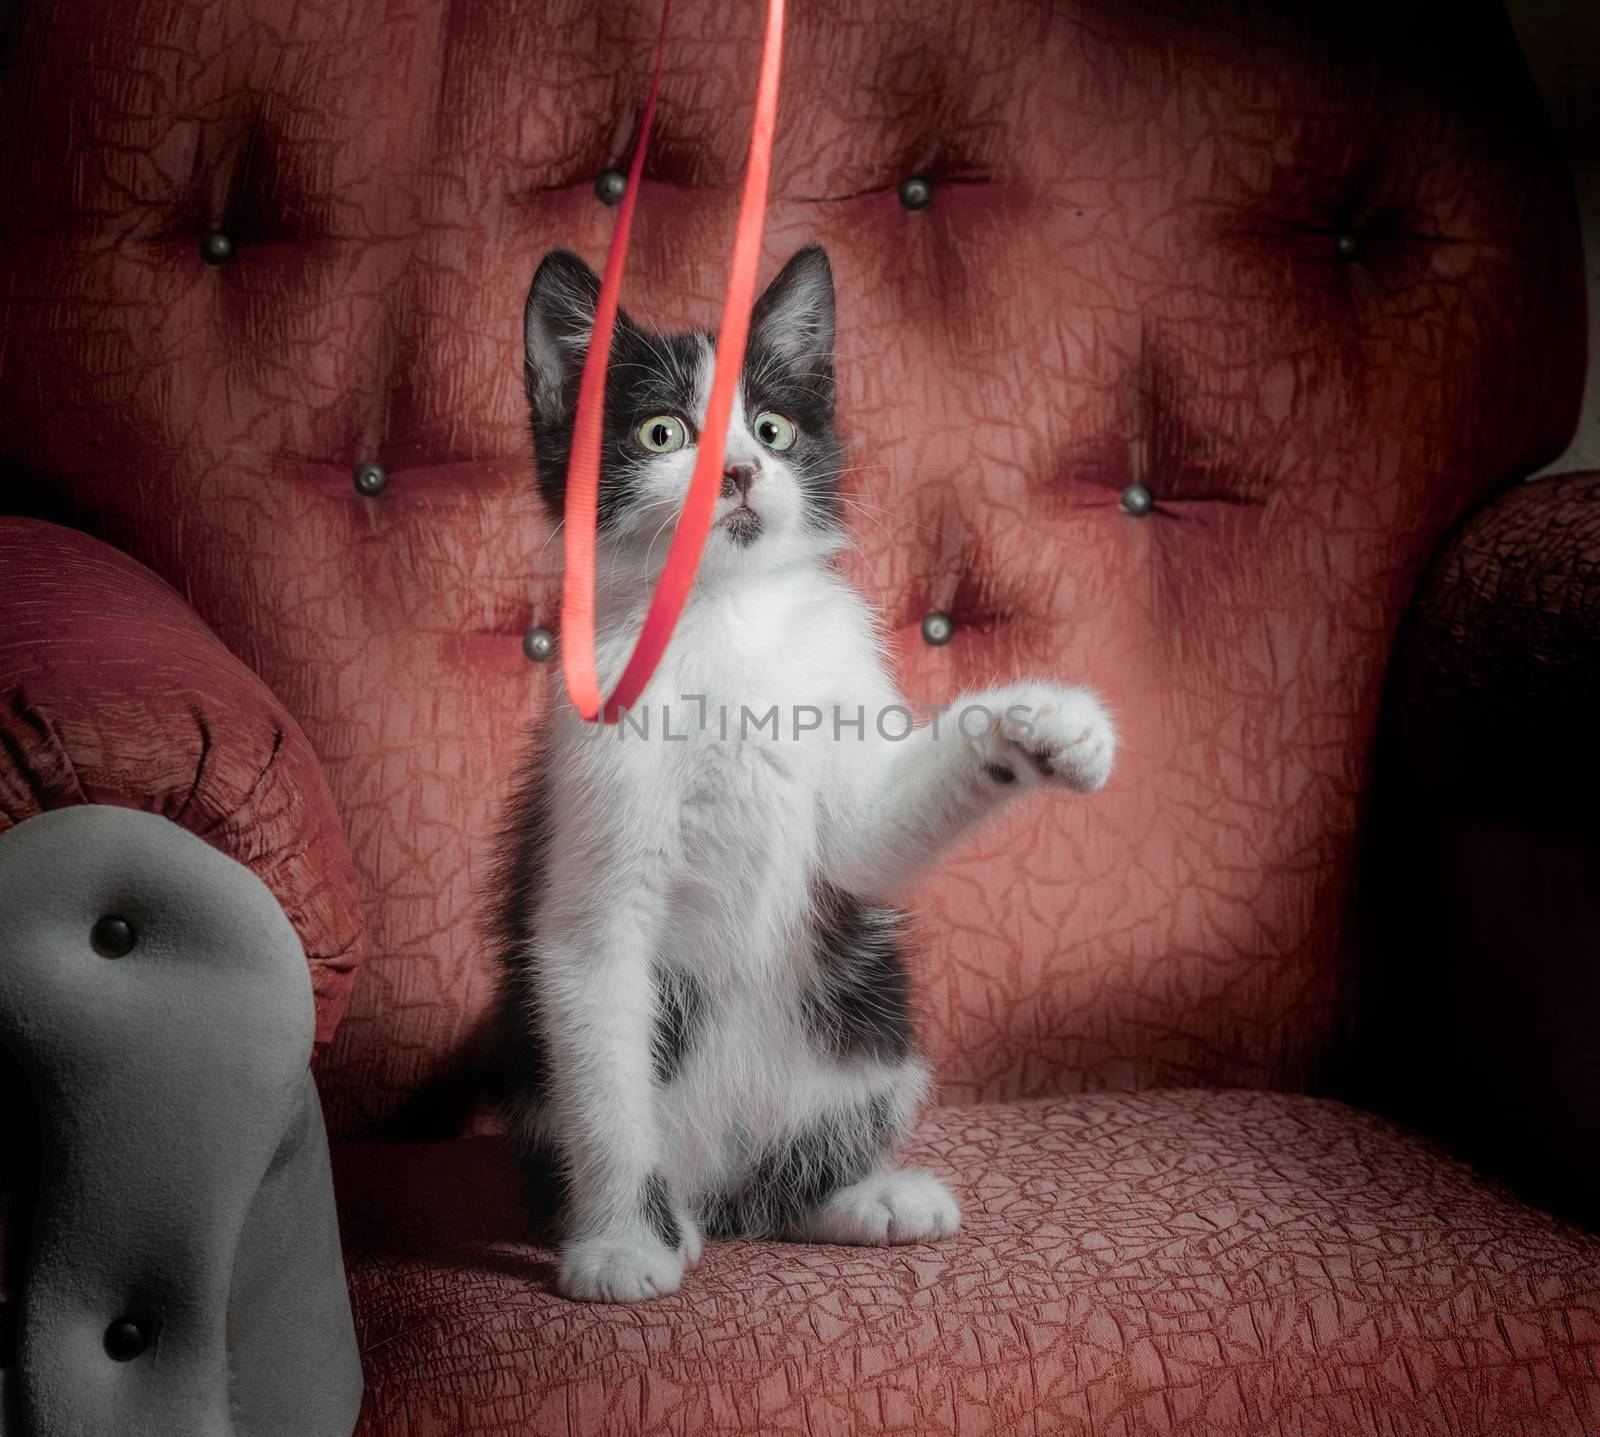 black and white outbred kitten on a red sofa plays with a ribbon